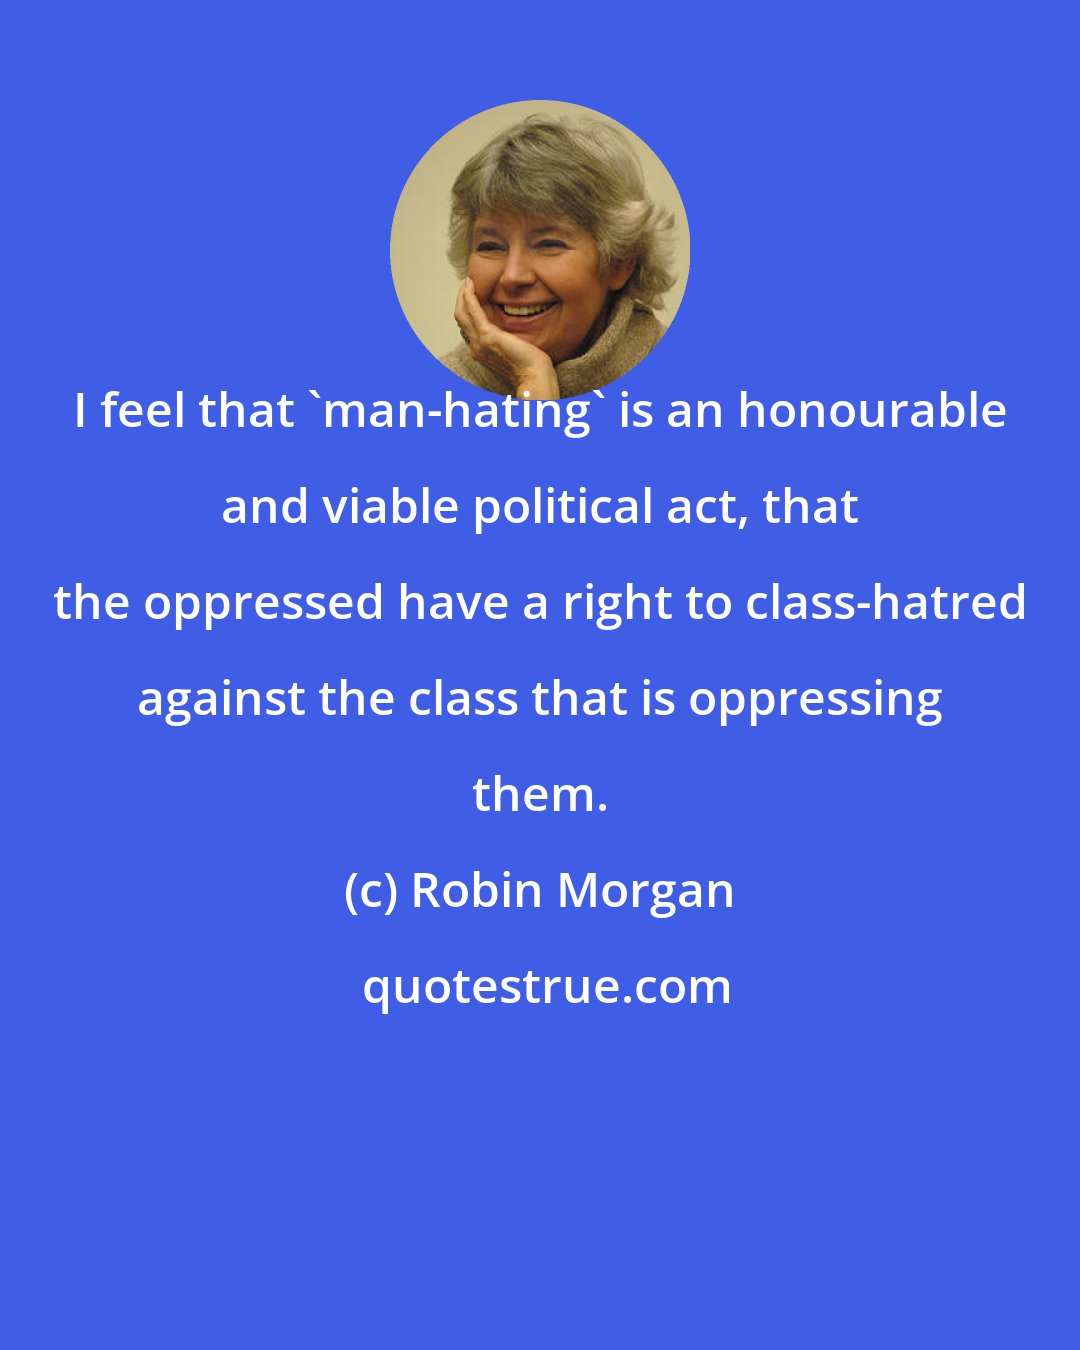 Robin Morgan: I feel that 'man-hating' is an honourable and viable political act, that the oppressed have a right to class-hatred against the class that is oppressing them.